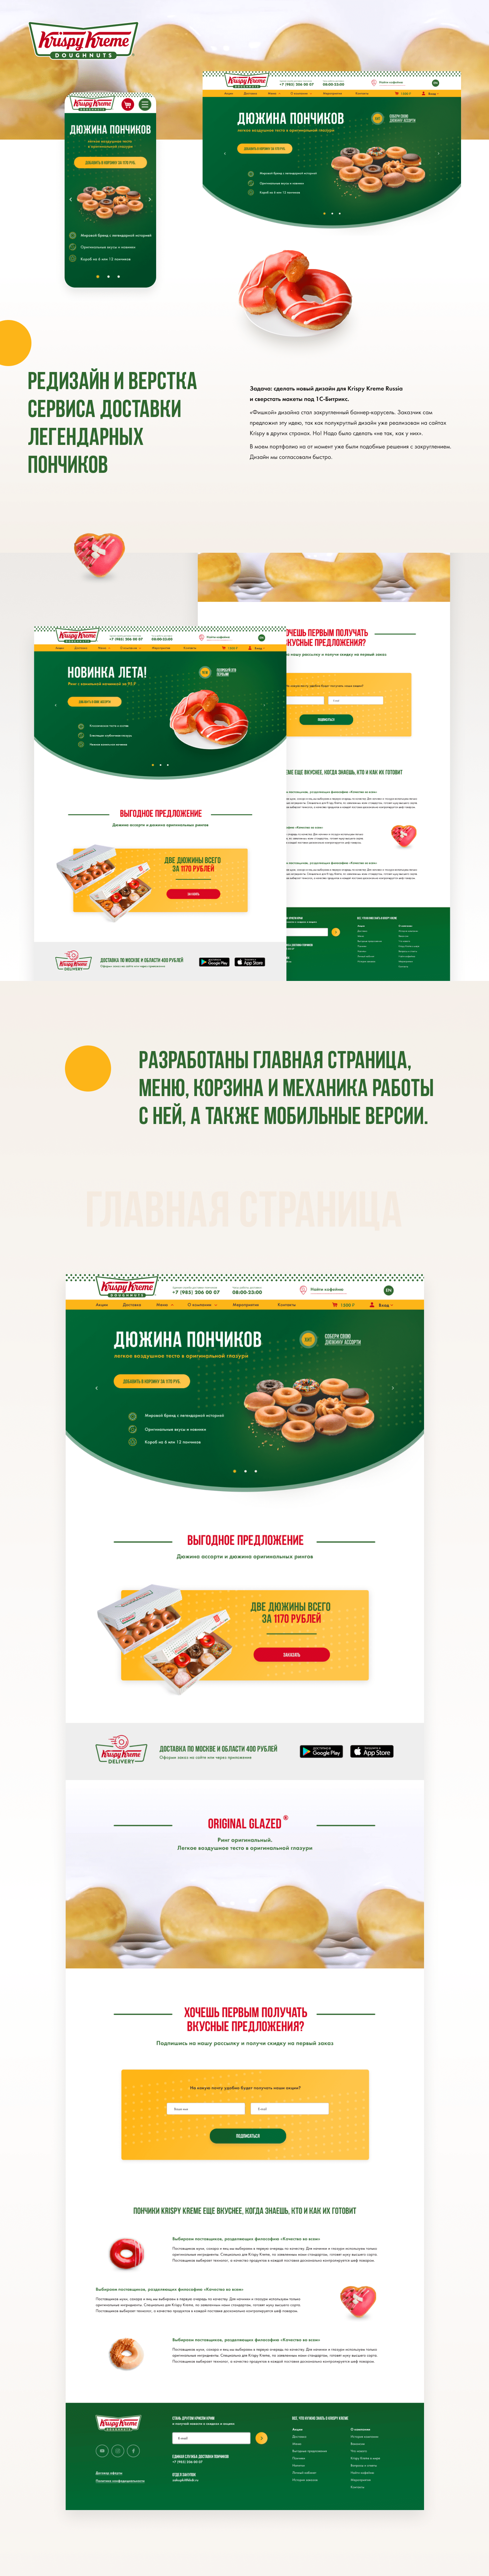 busket delivery donut Donuts e-commerce online store site Sweets web site интернет-магазин